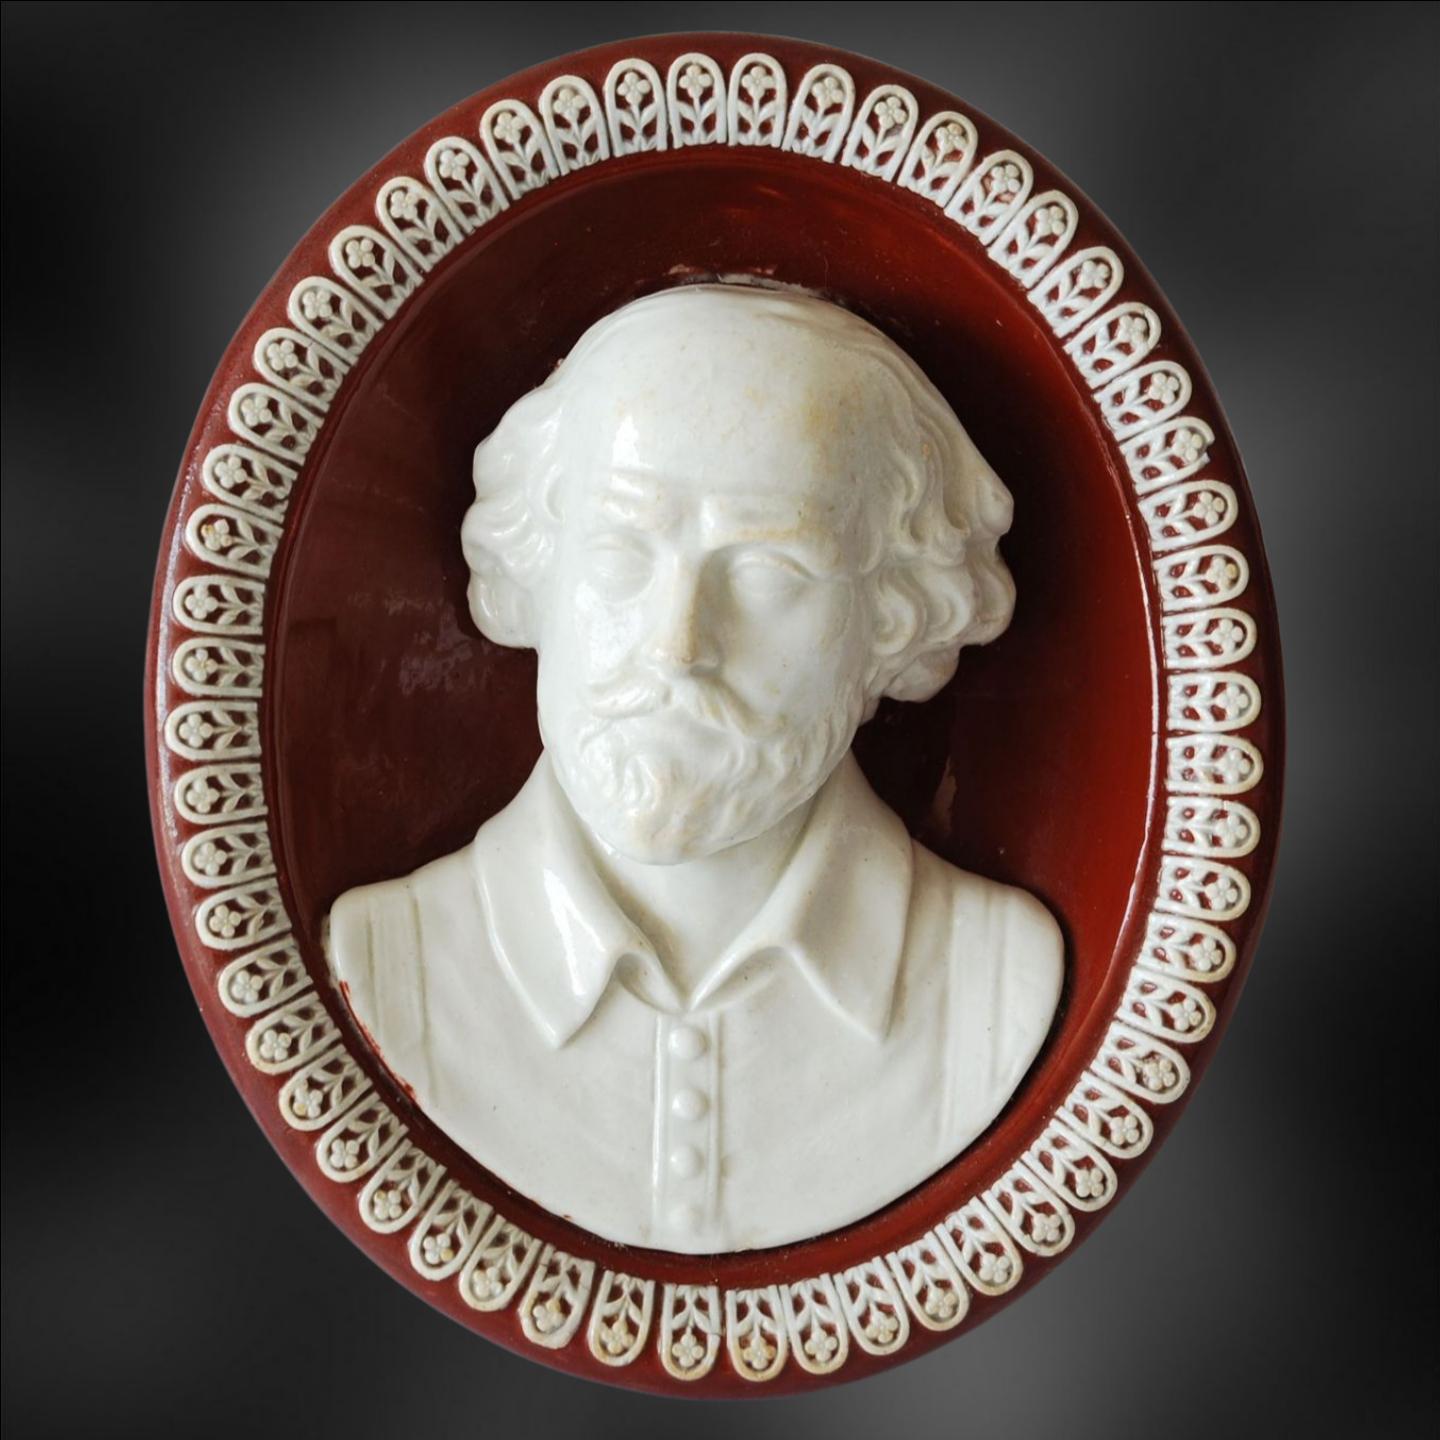 A style of portrait previously unknown, this extraordinarily deep bust of Shakespeare is in creamware, with a cold painted background.

William Shakespeare (1564-1616) is widely regarded as one of the greatest playwrights and poets in the English